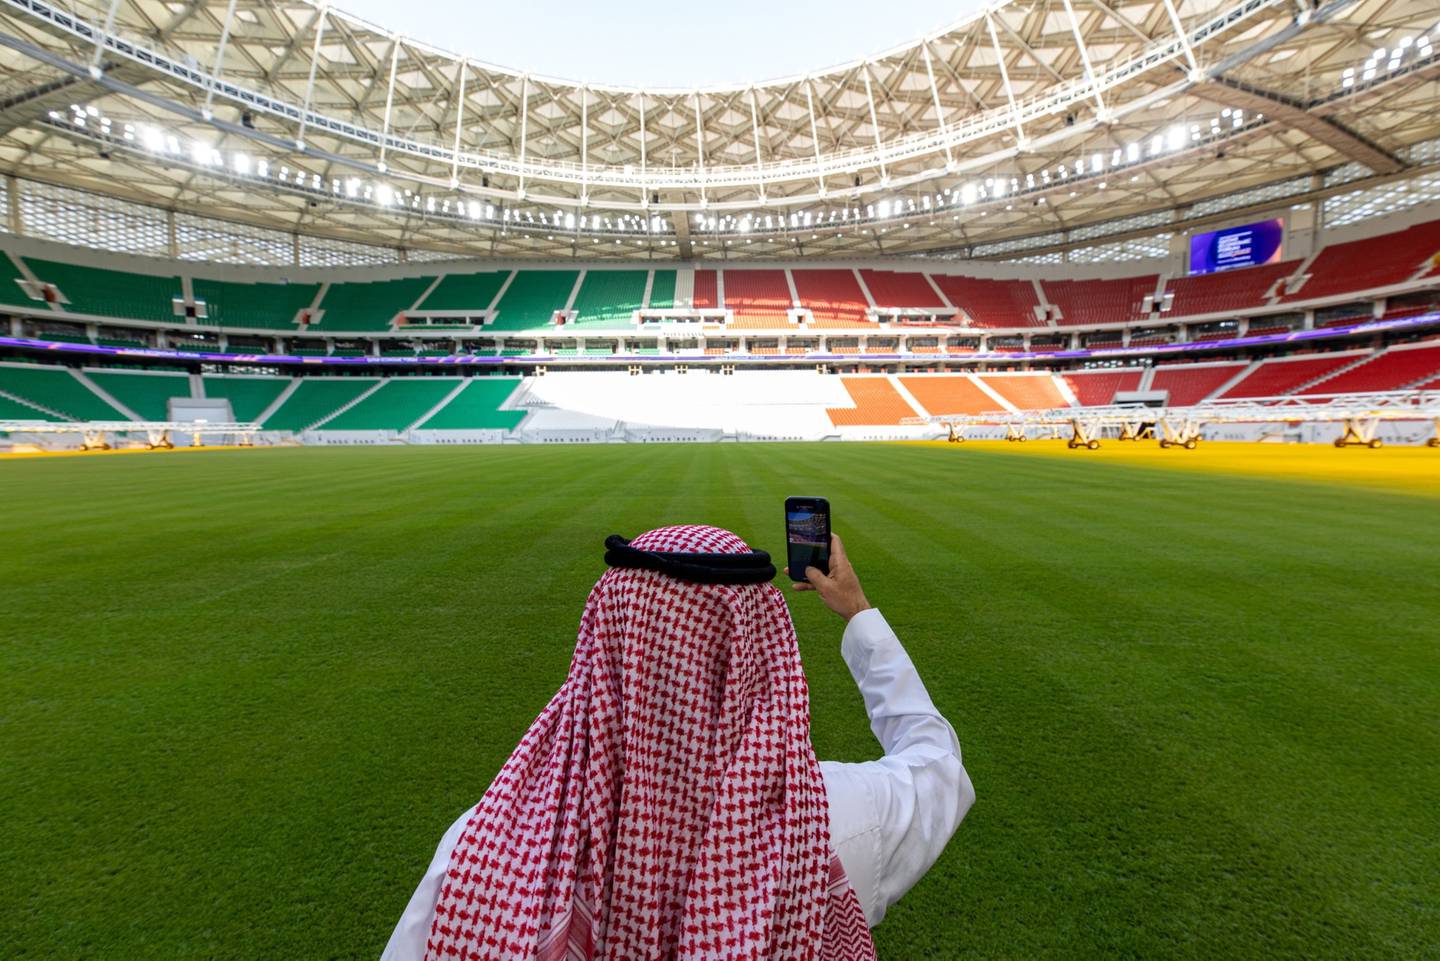 A visitor takes a smartphone photograph pitch side at the Al Thumama football stadium in Doha, Qatar.